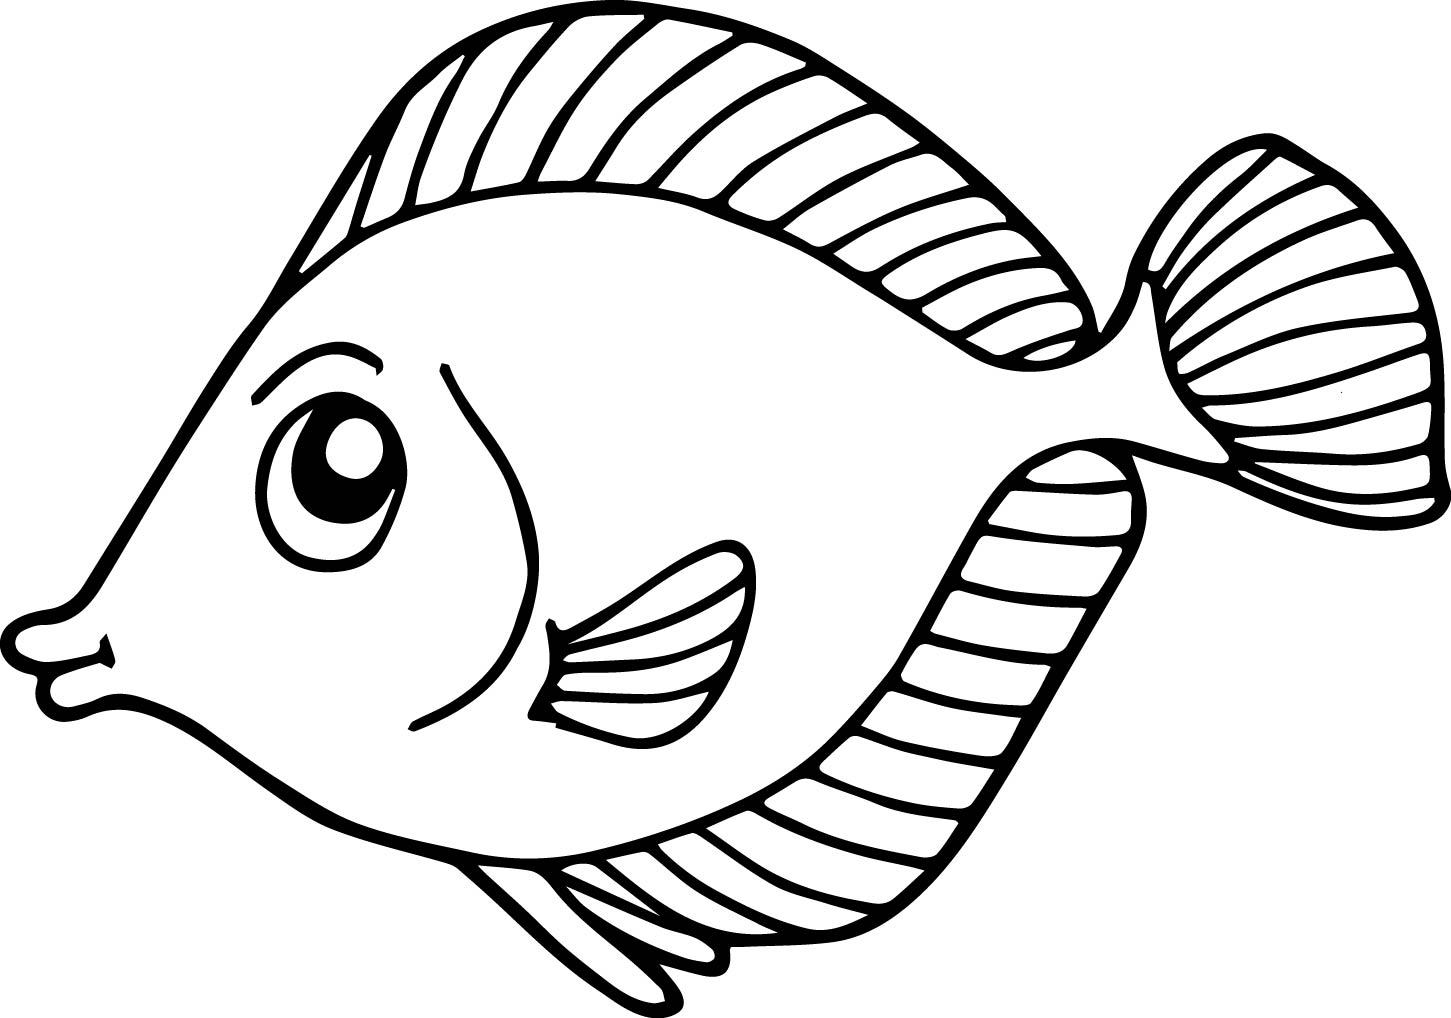 Fish Coloring Pages For Kids - Preschool and ...